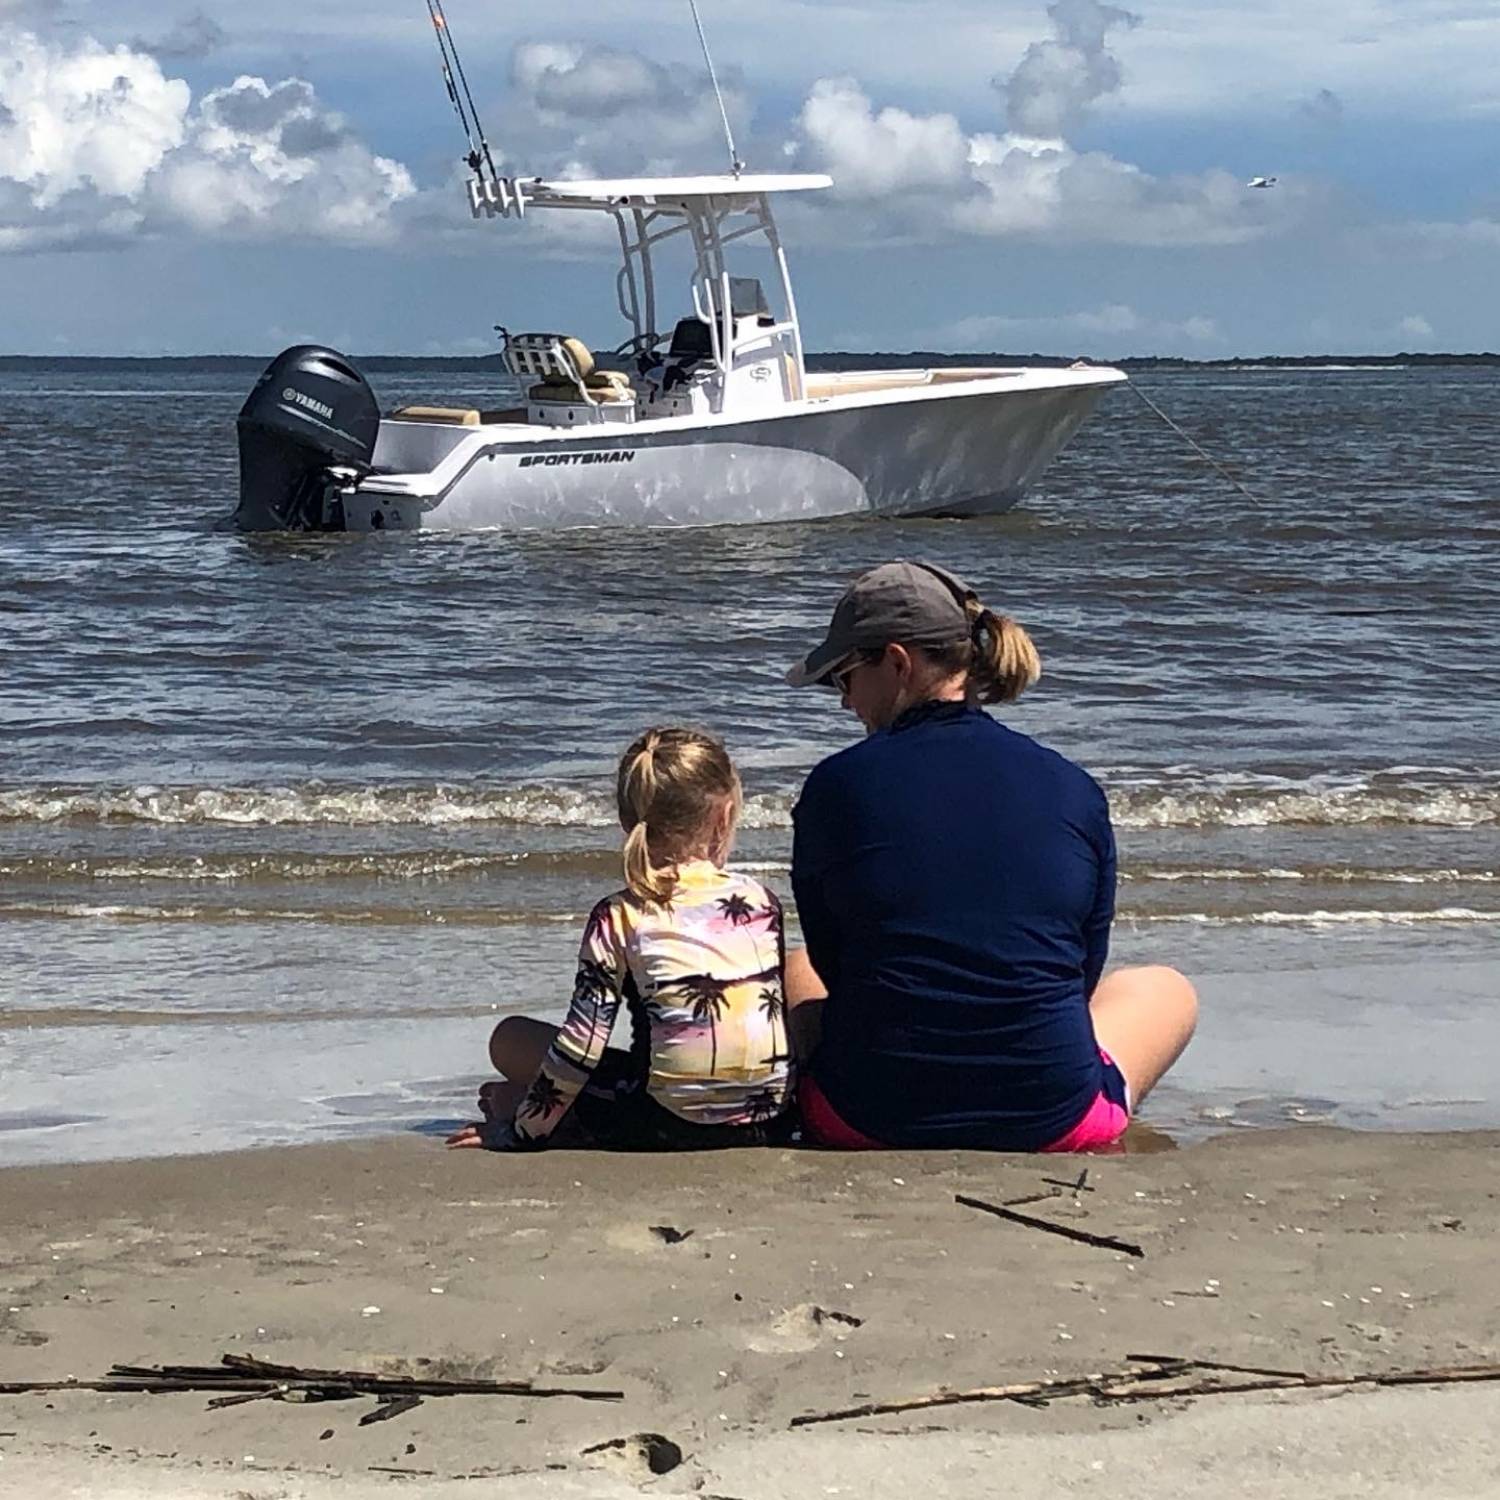 Title: My loves - On board their Sportsman Open 212 Center Console - Location: Blackbeard Island by Shellmans Bluff, GA. Participating in the Photo Contest #SportsmanSeptember